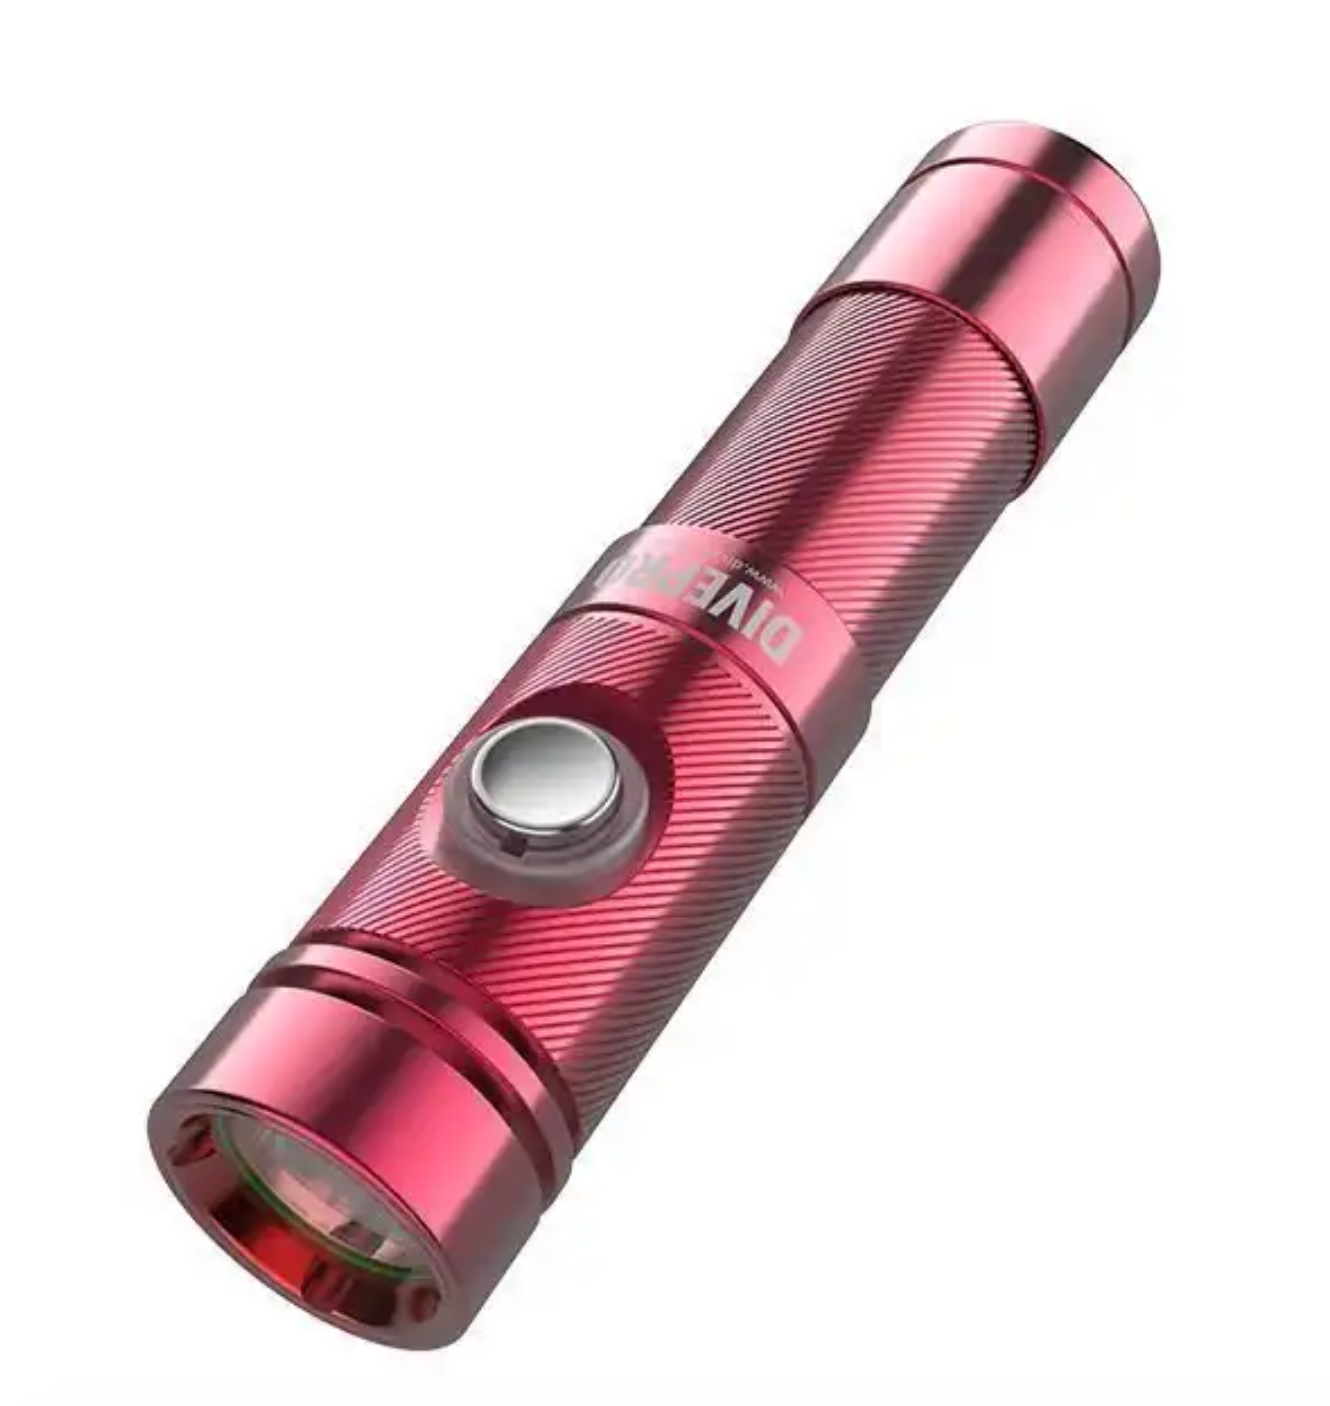 Divepro Divepro S10 S1000 lumen Compact Basic Diving Torch Red - Oyster Diving